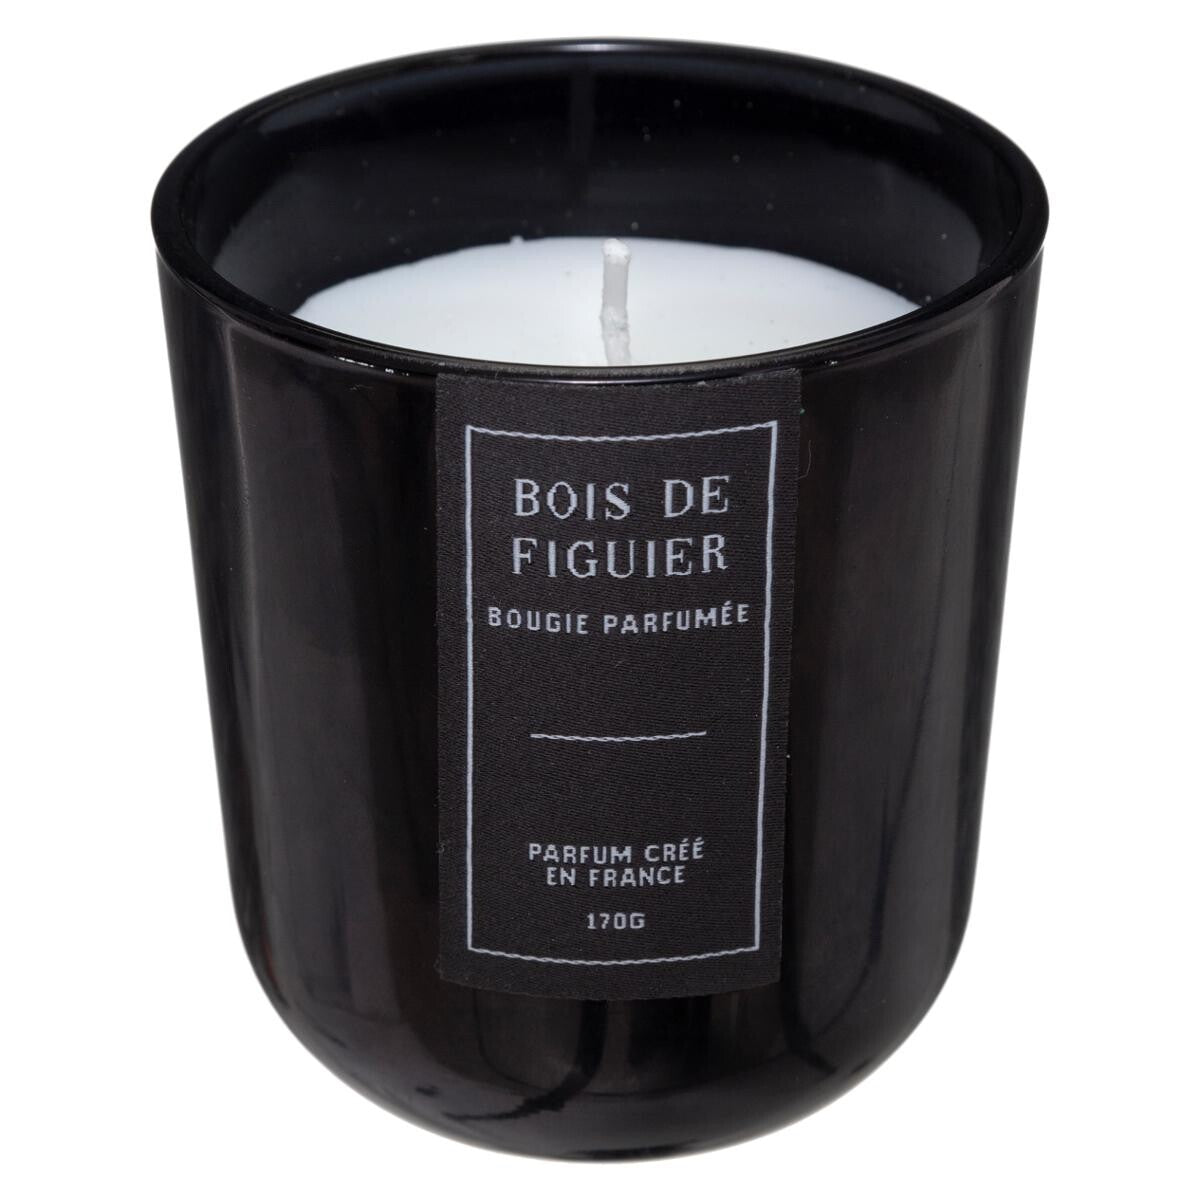  Scented candle - fig tree aroma